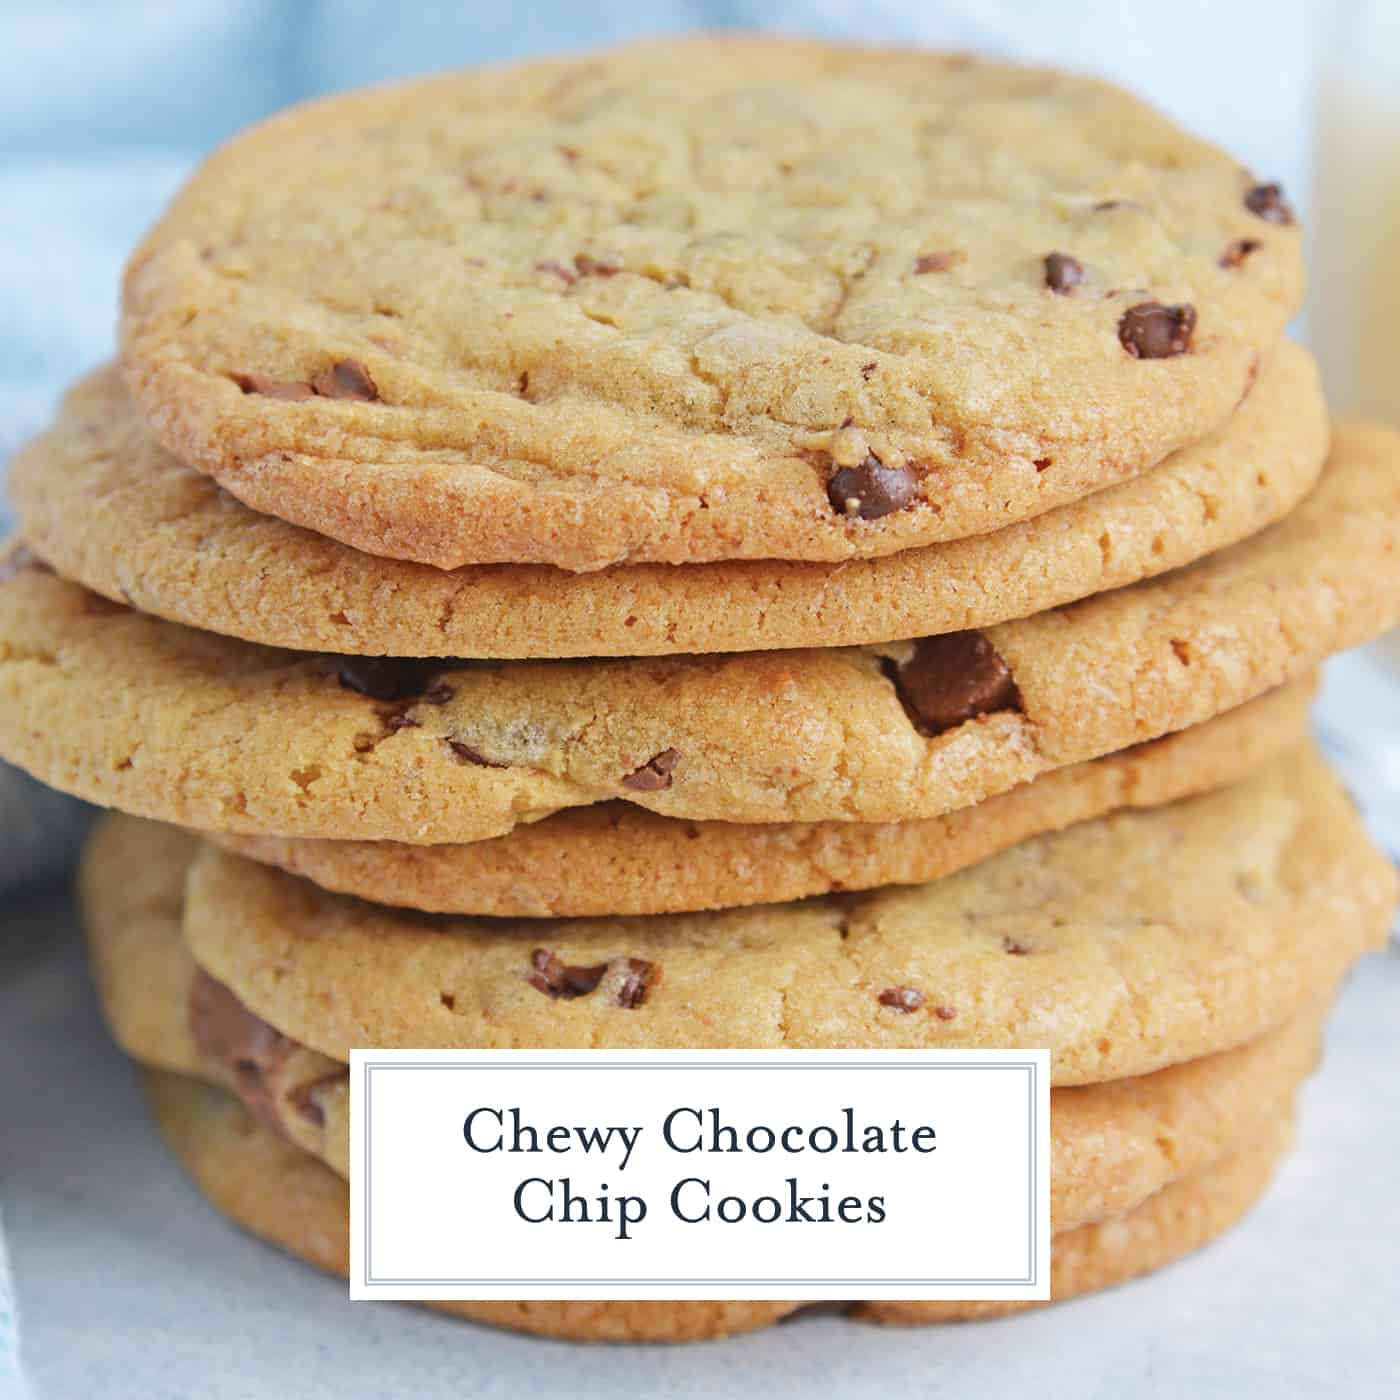 Chewy Chocolate Chip Cookies - Best Chocolate Chip Cookie Recipe